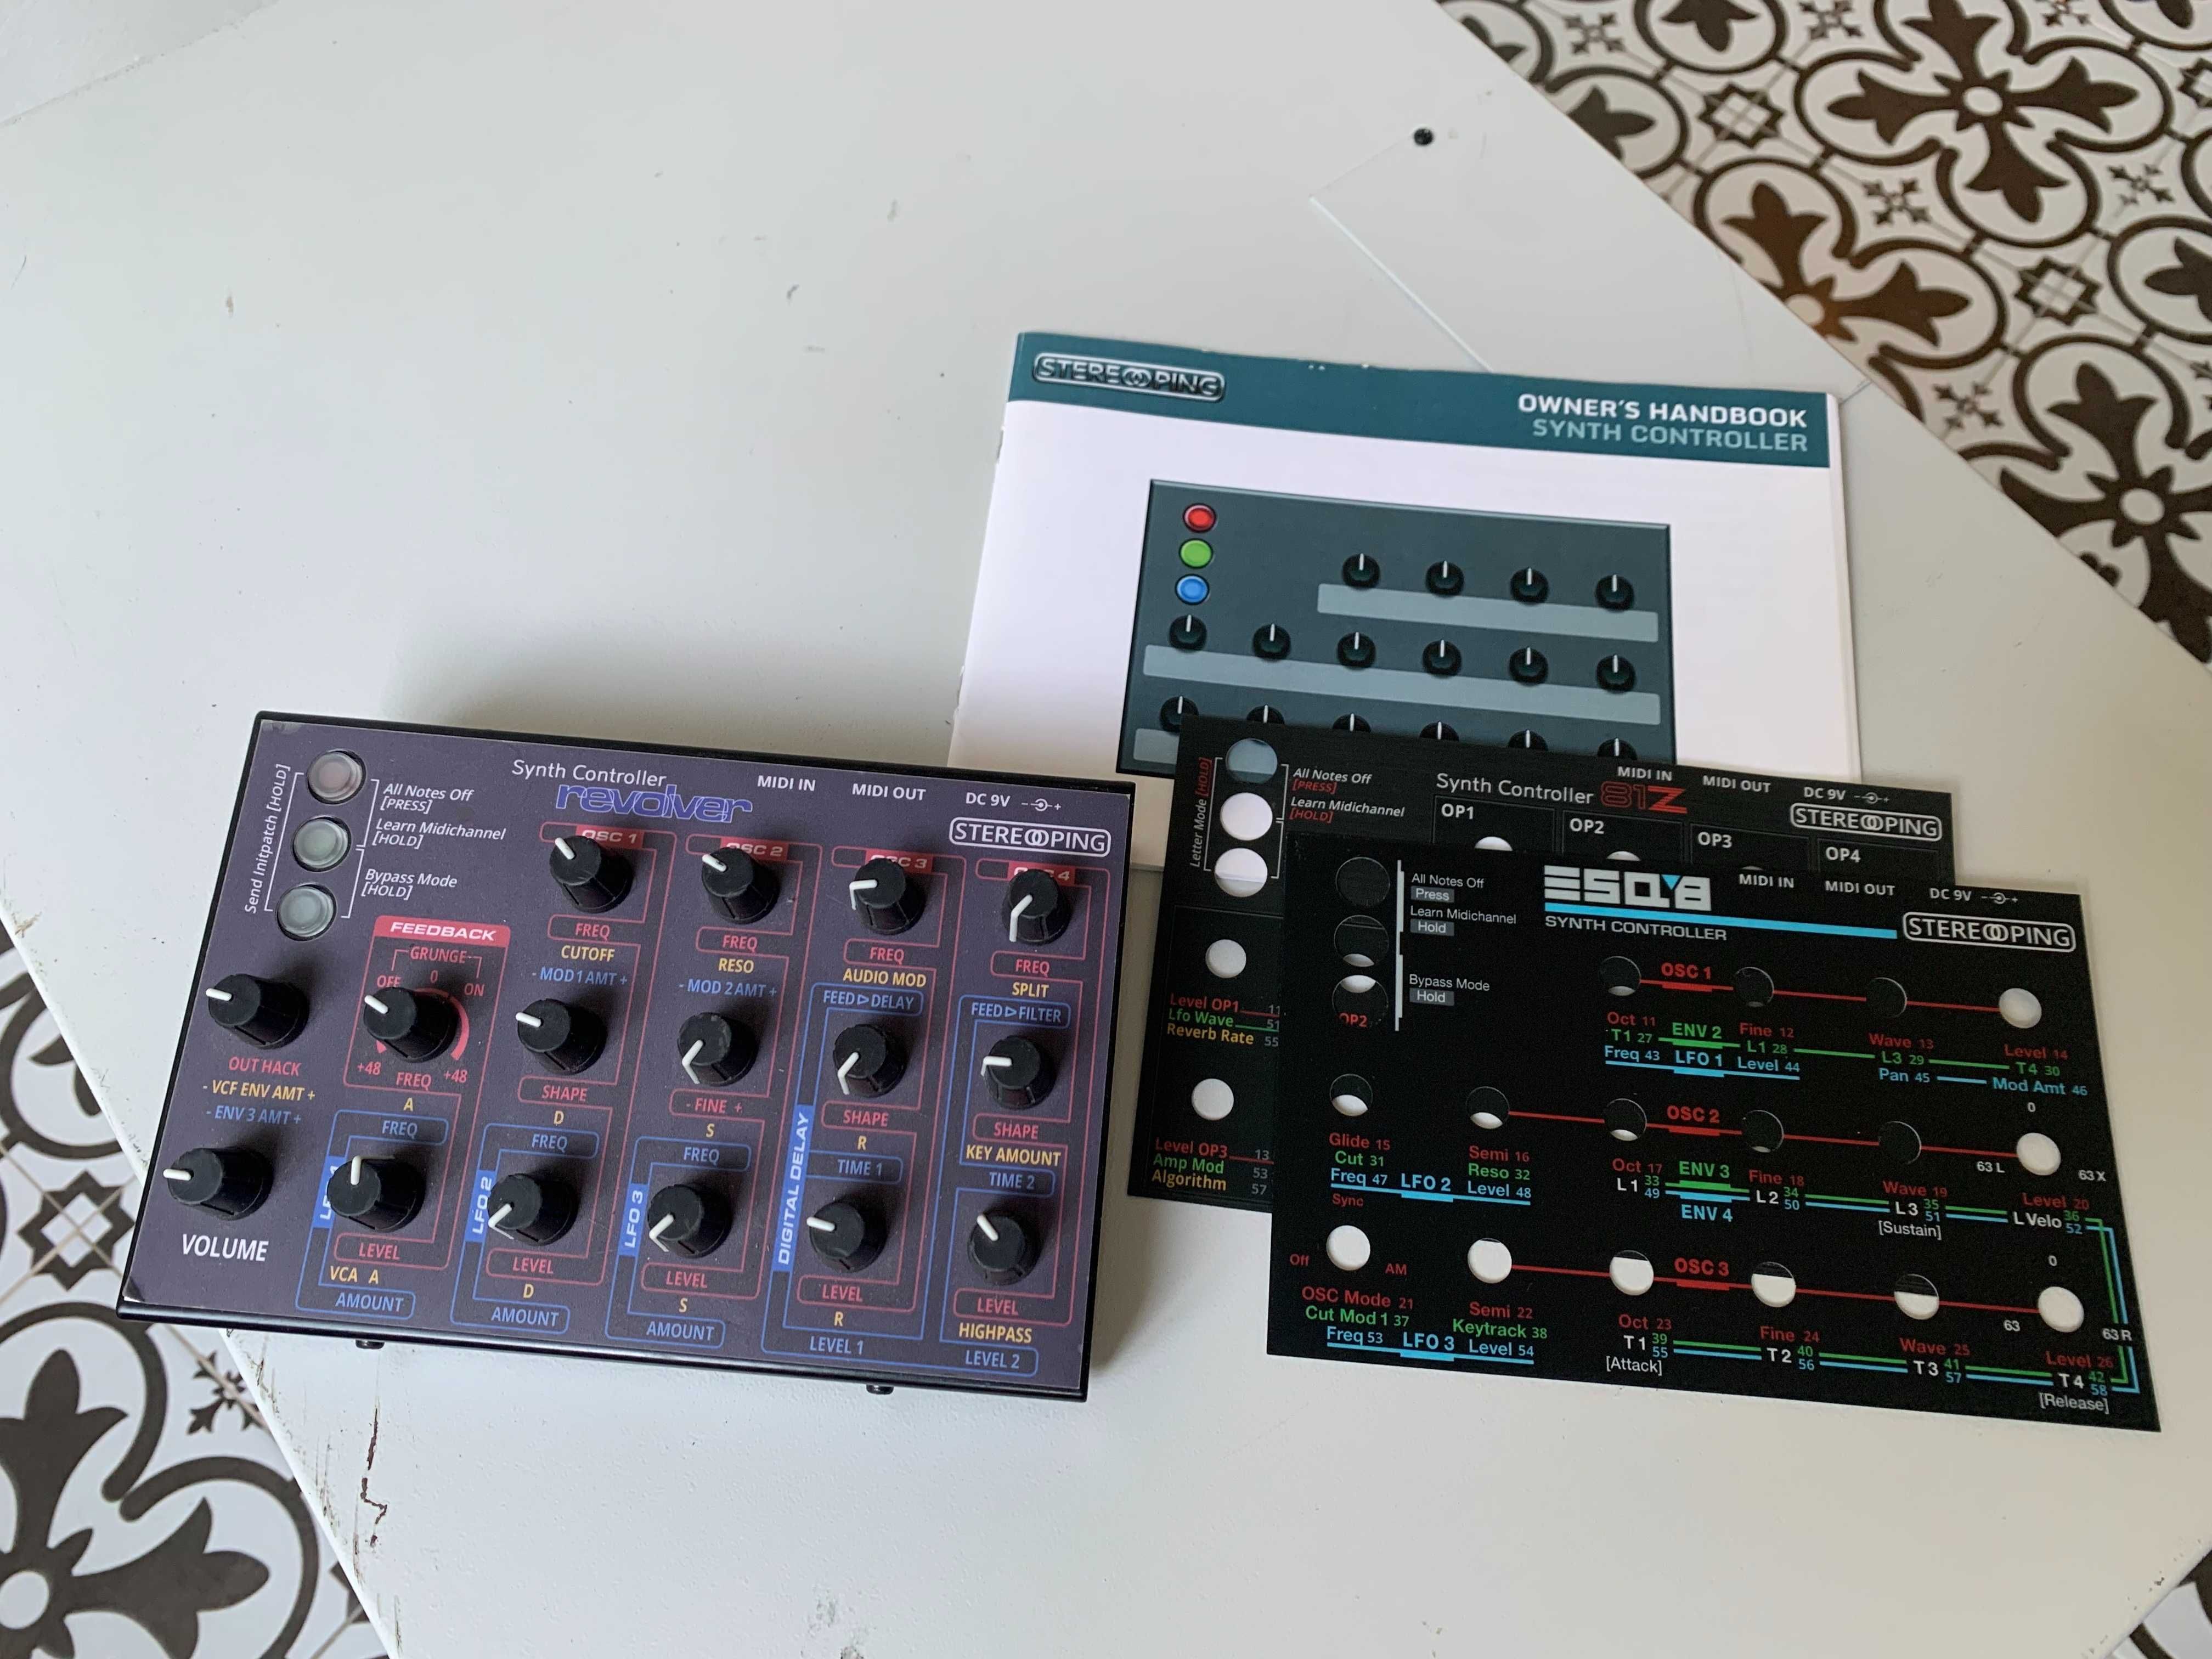 Stereoping CE-1 Programmer for Vintage Synths Midi